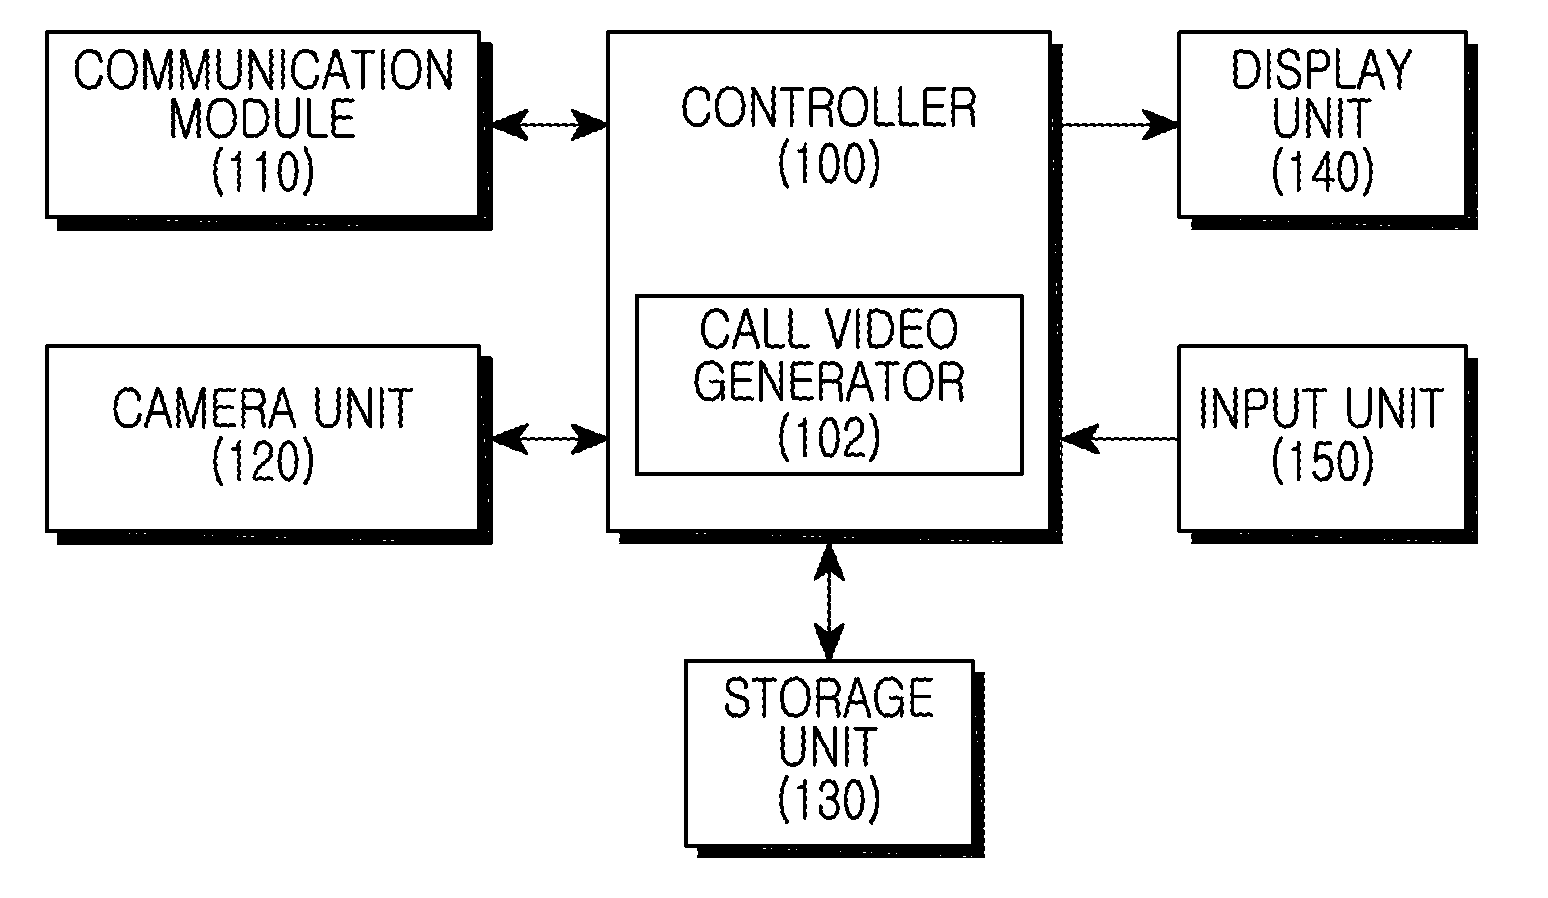 Method and apparatus for video call in a mobile terminal